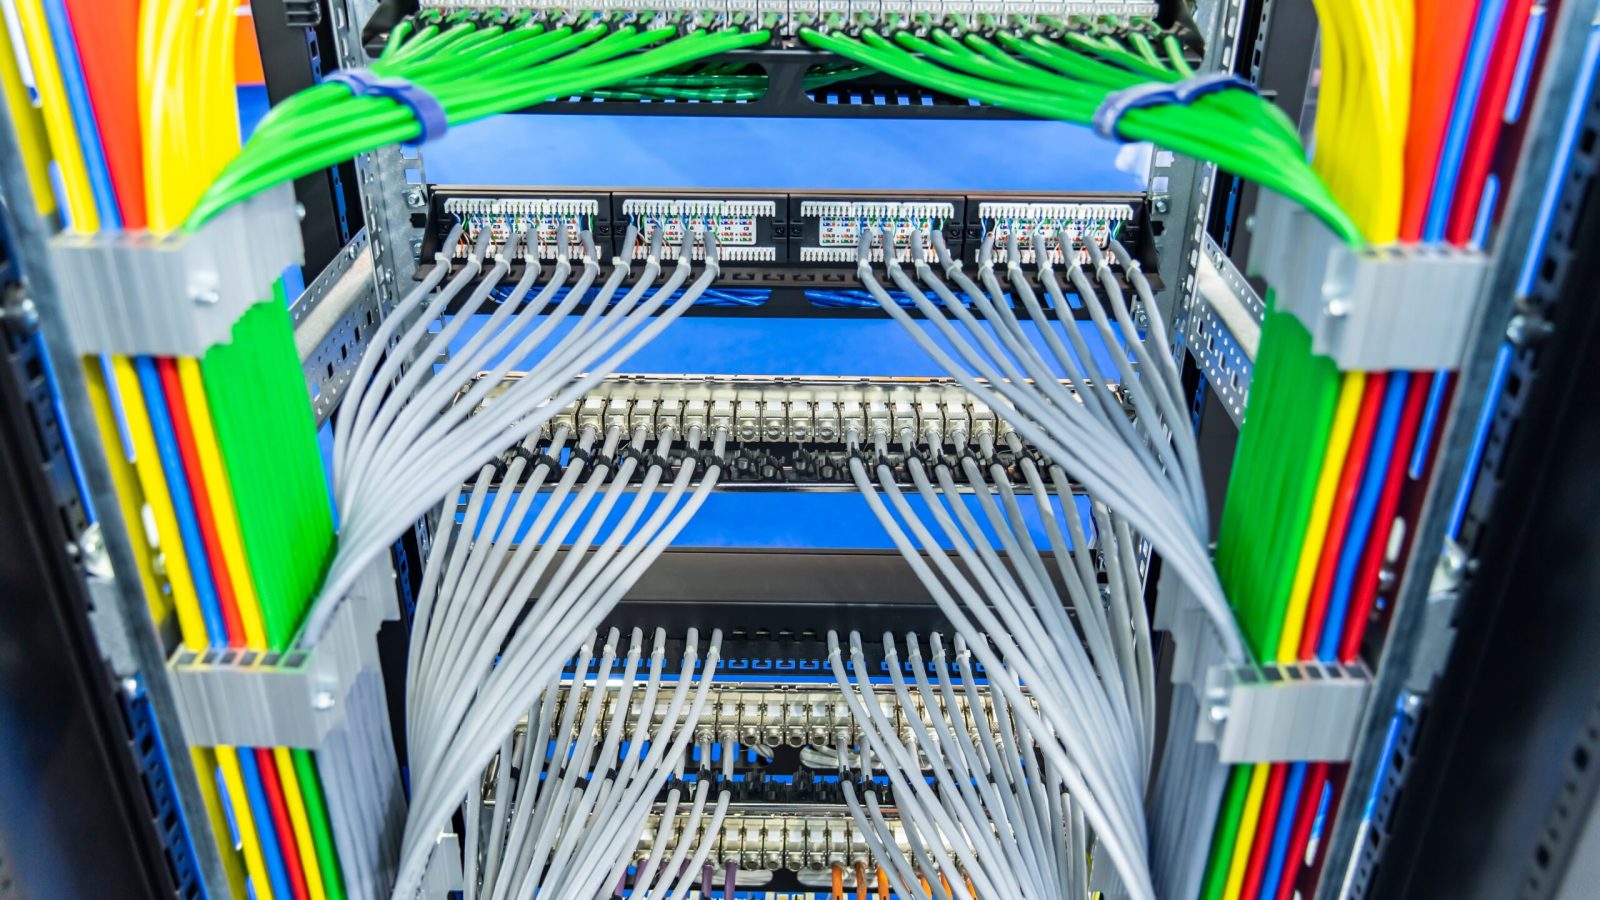 Dive into the world of structured cabling excellence with this vibrant display of meticulously organized cables. Comtek ensures impeccable cable solutions in Des Moines, Ankeny, and throughout Iowa.